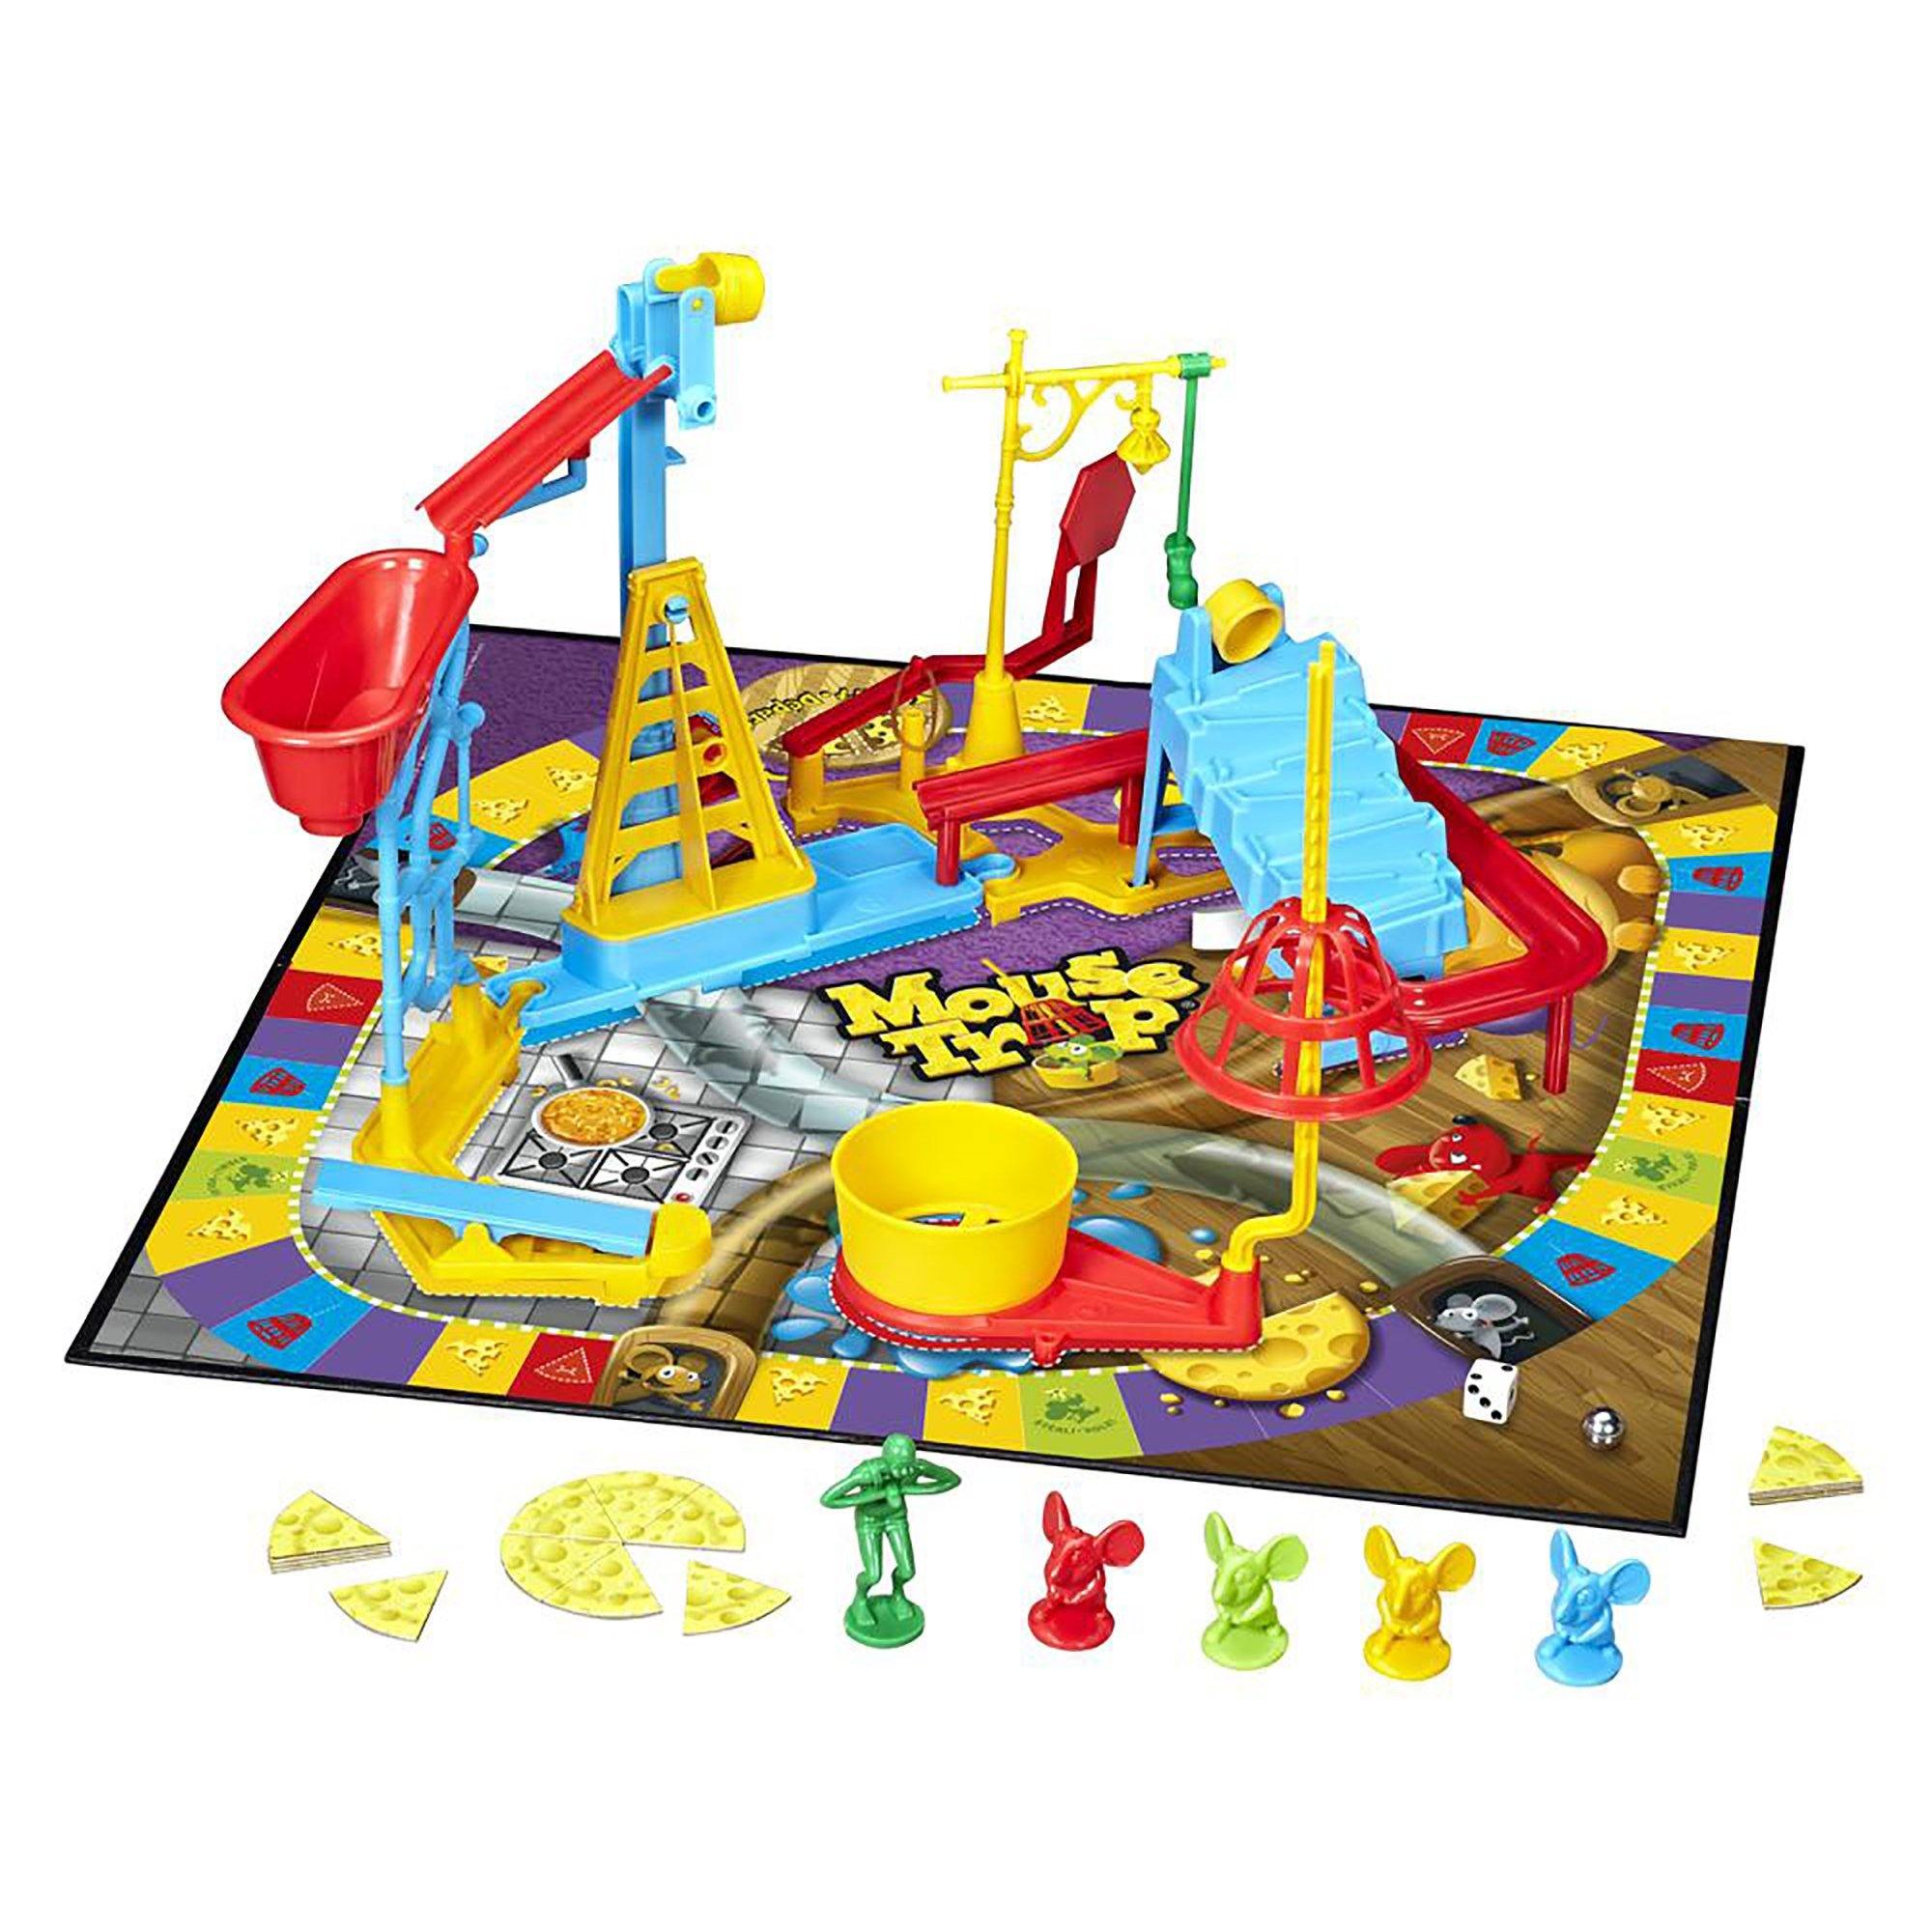 Game Mouse Trap Refresh - Hasbro Boardgame - Dollar Max Depot